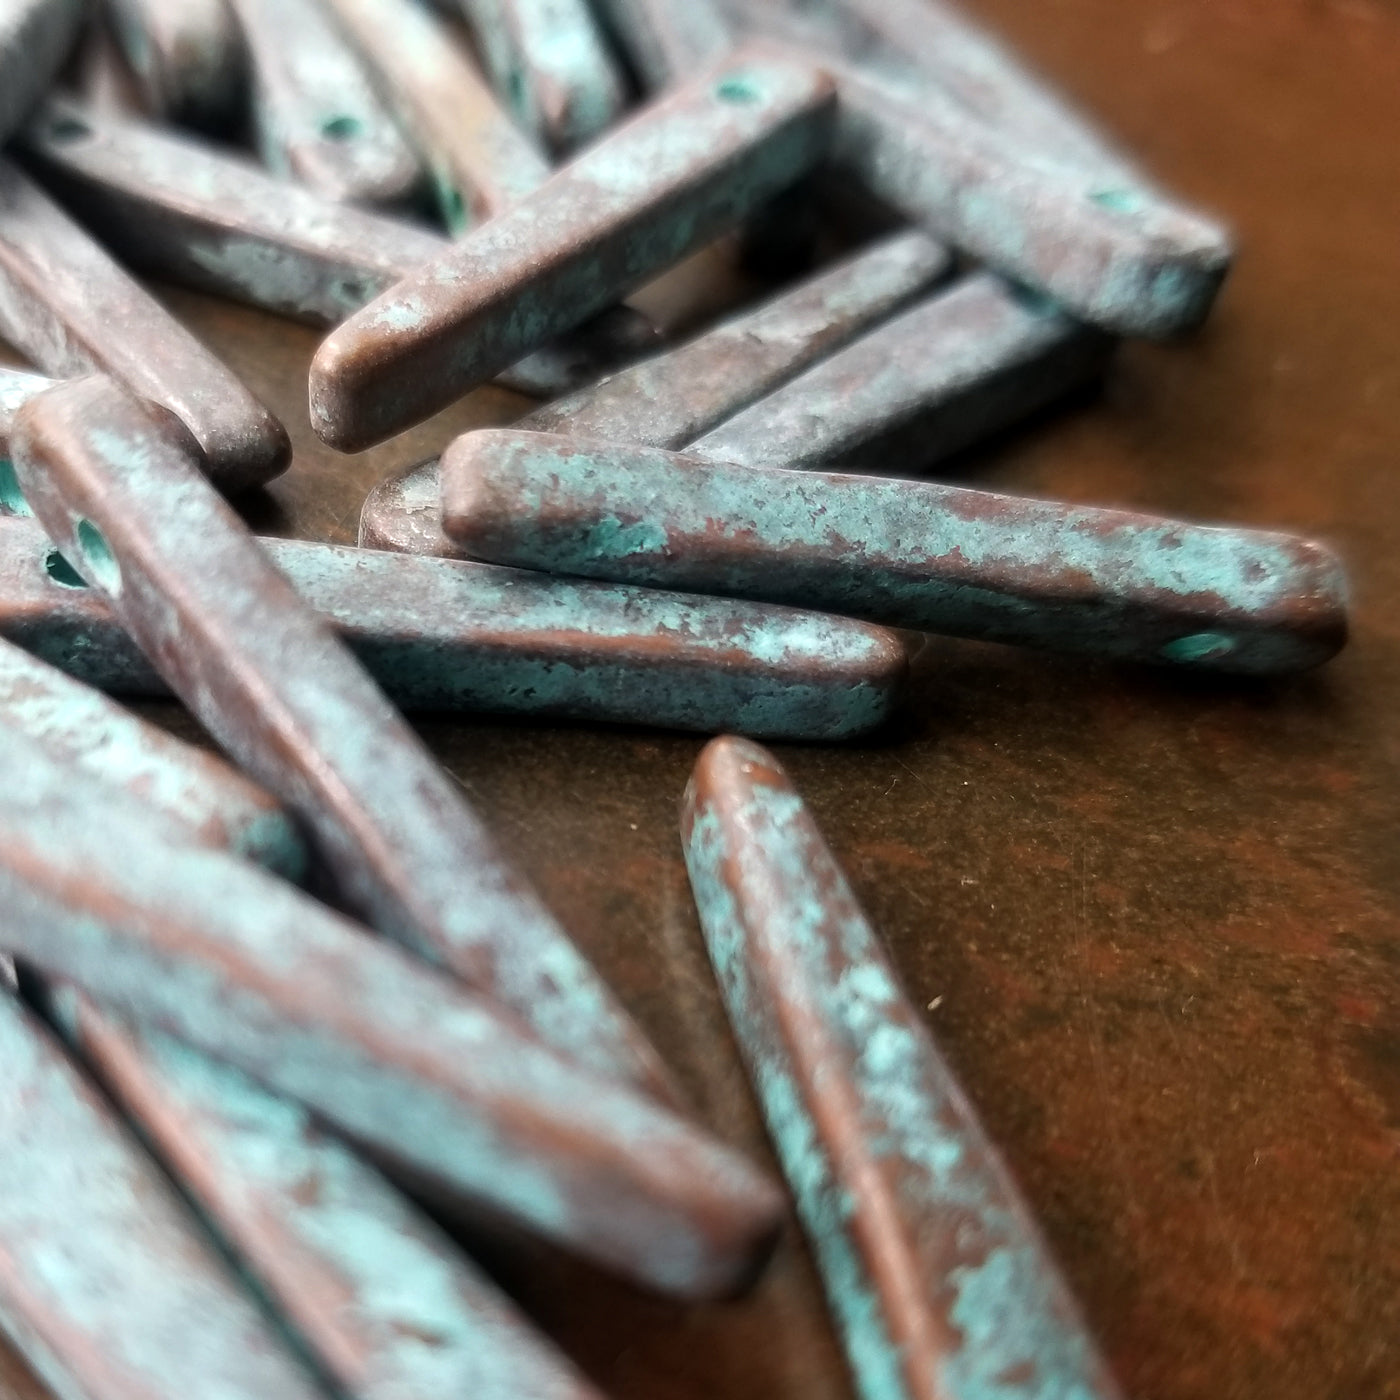 Spike Beads, 30mm x 5mm Mykonos Stick Beads, 4, 8 or 12 pieces, Verde Gris Green Rustic Patina Daggers, Bronze/Copper Jewelry Making Supply